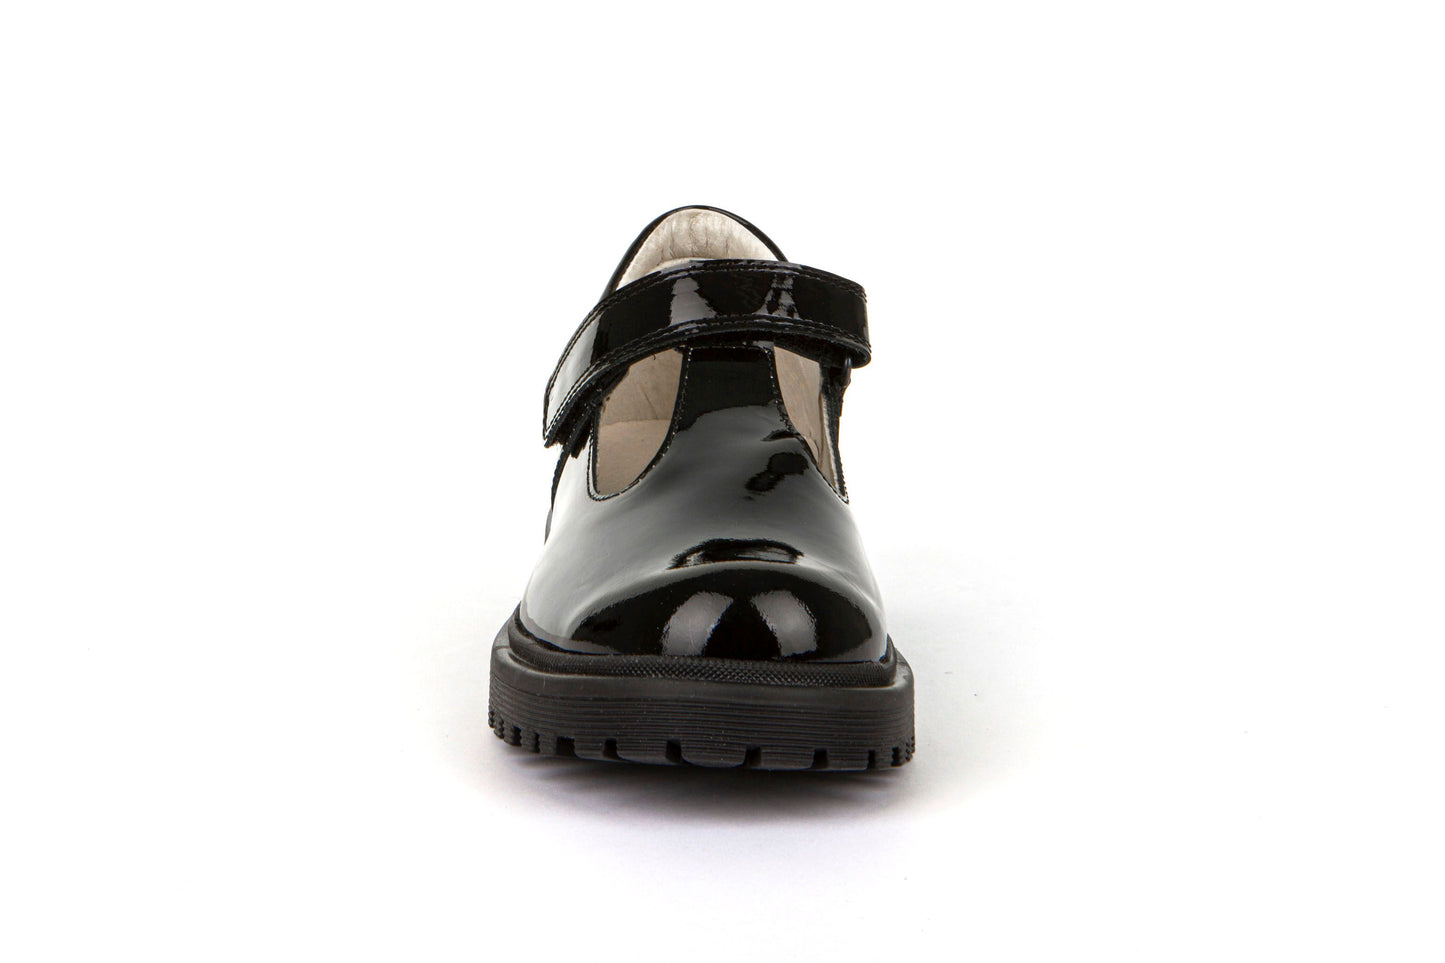 A girls T-Bar school shoe by Froddo, style Lea T, in black patent with velcro fastening. Front view.